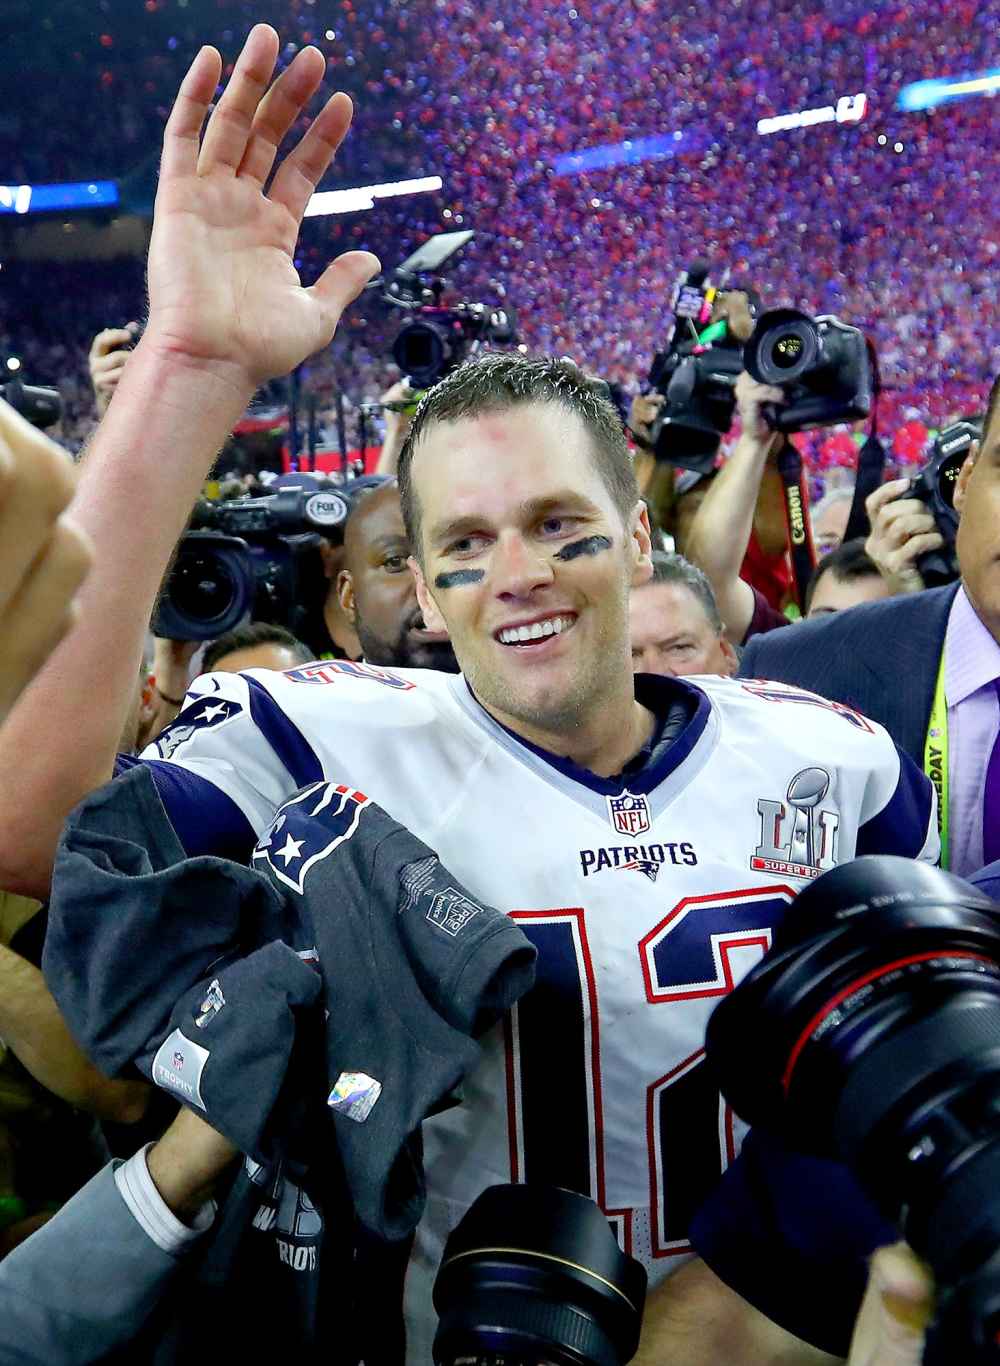 om Brady #12 of the New England Patriots celebrates after defeating the Atlanta Falcons 34-28 in overtime of Super Bowl 51 at NRG Stadium on February 5, 2017 in Houston, Texas.